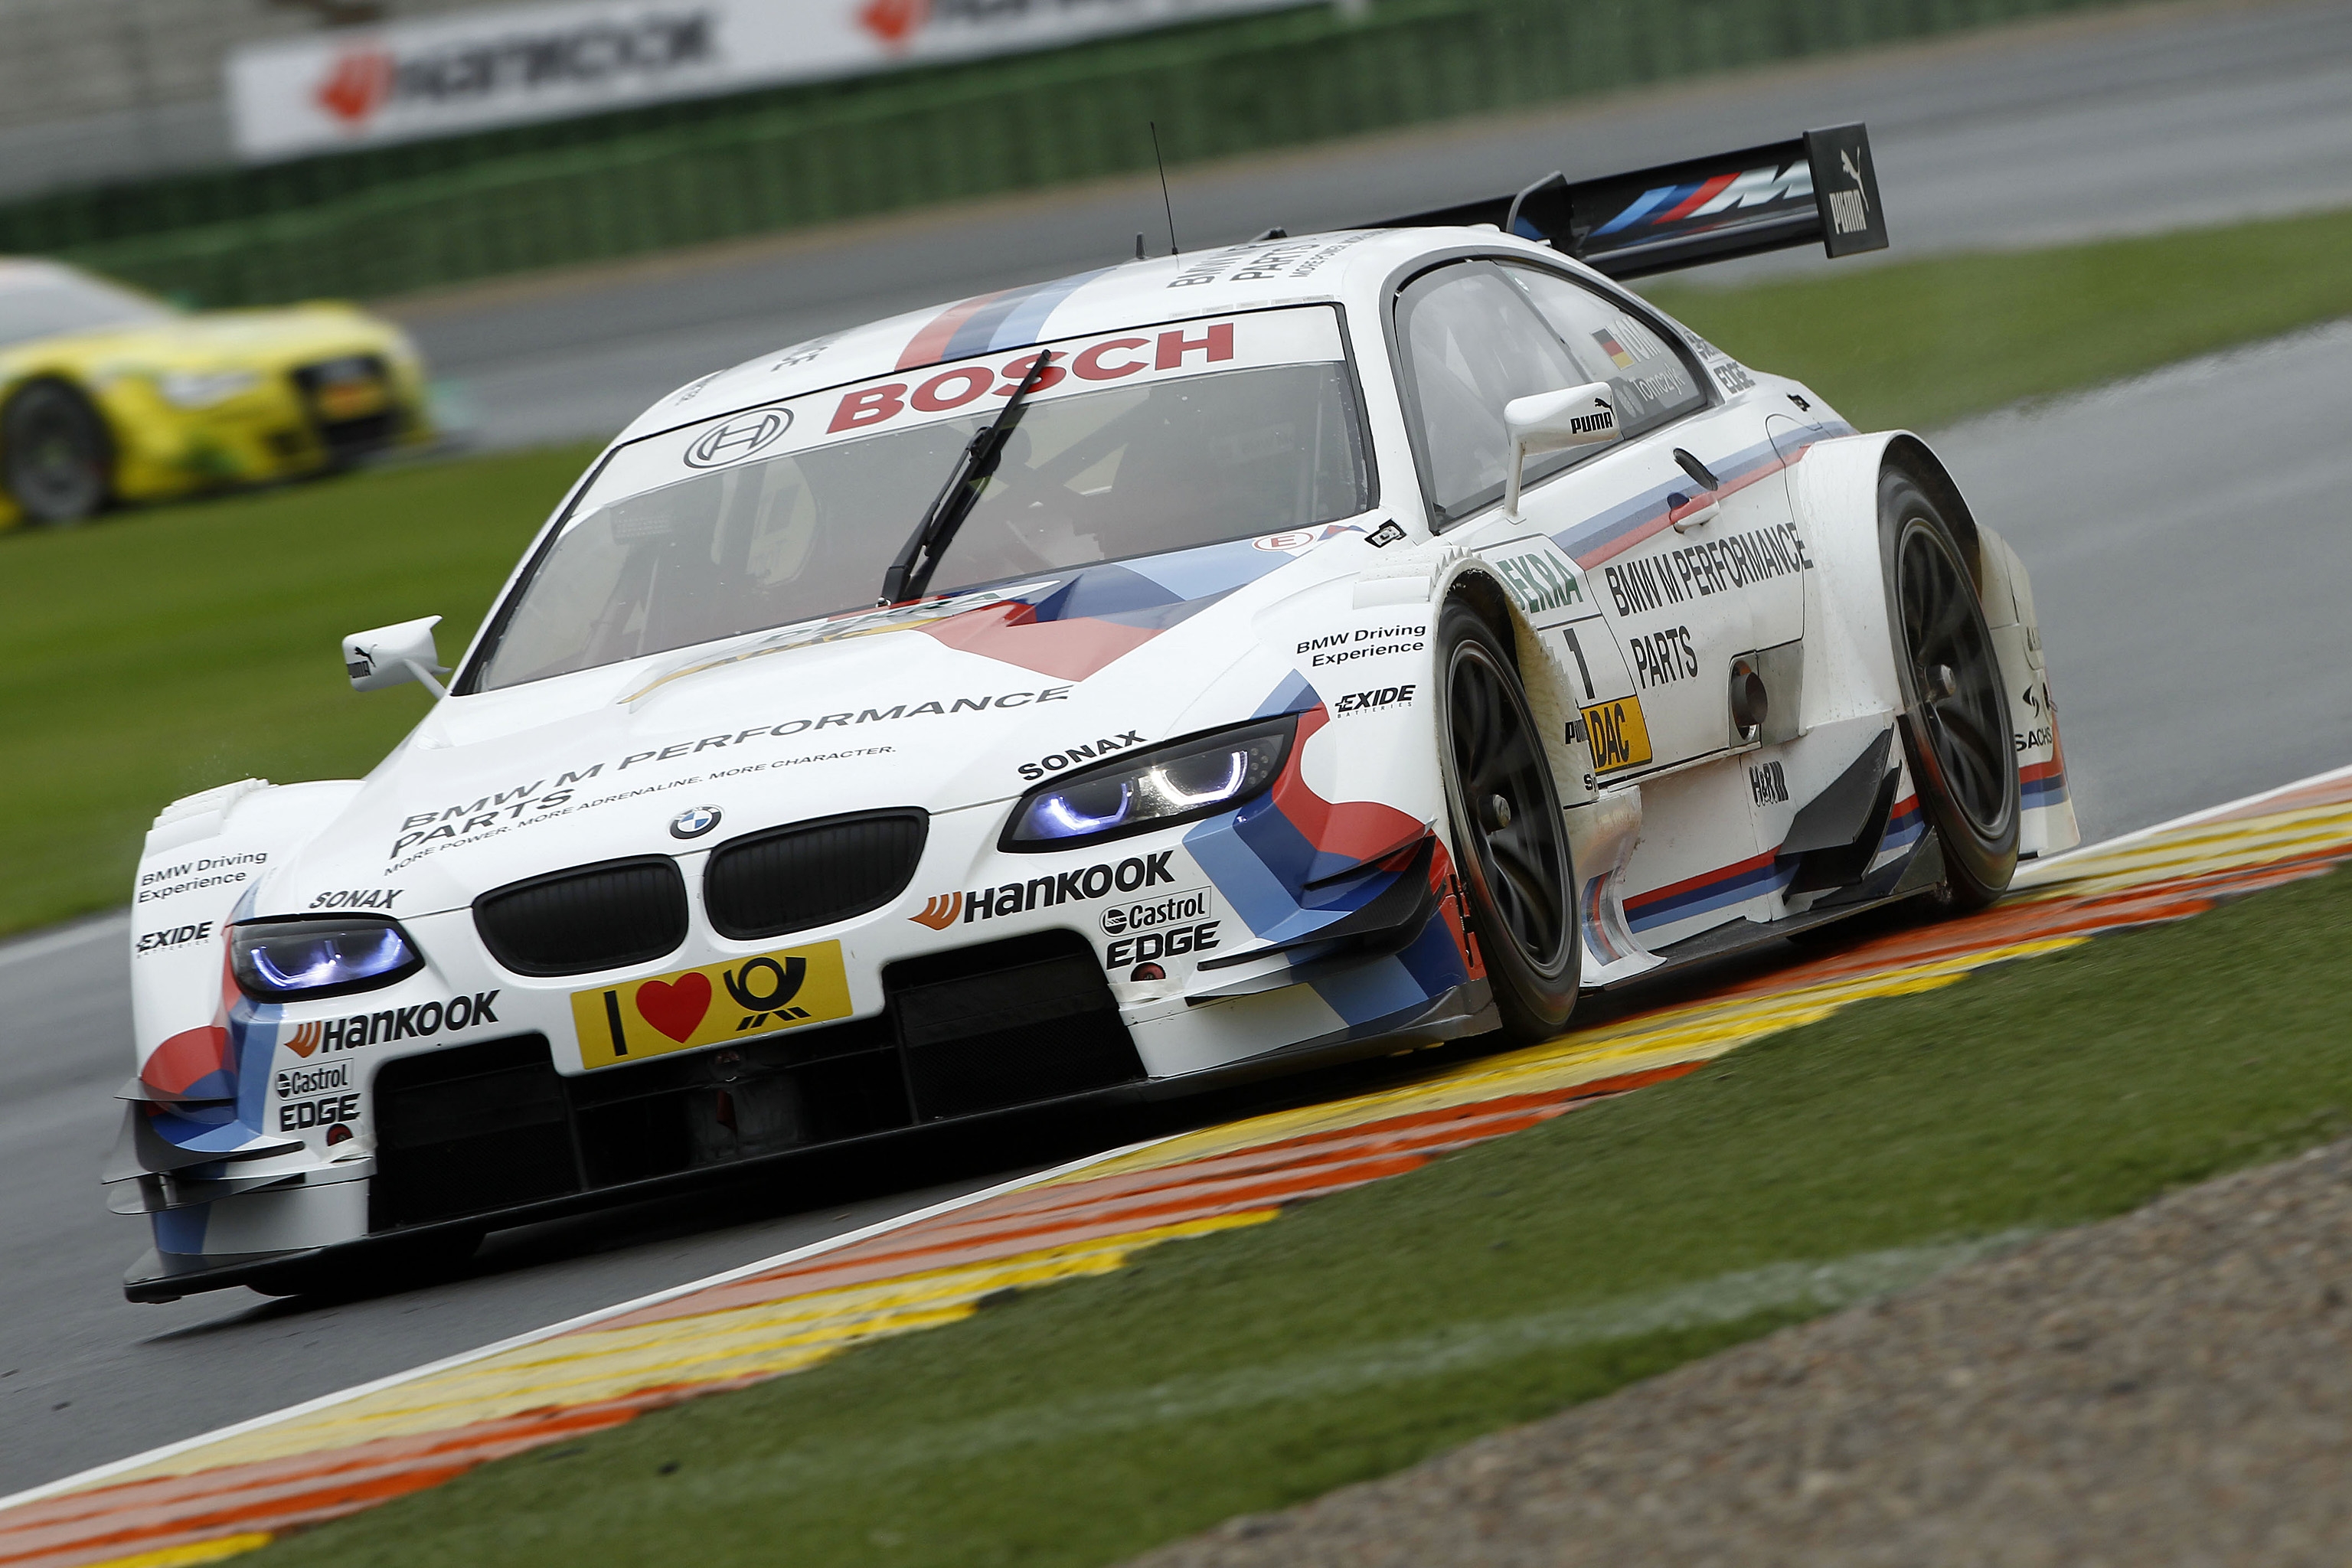 The Ultimate Racing Machine: 2012 BMW M3 DTM Champion Edition